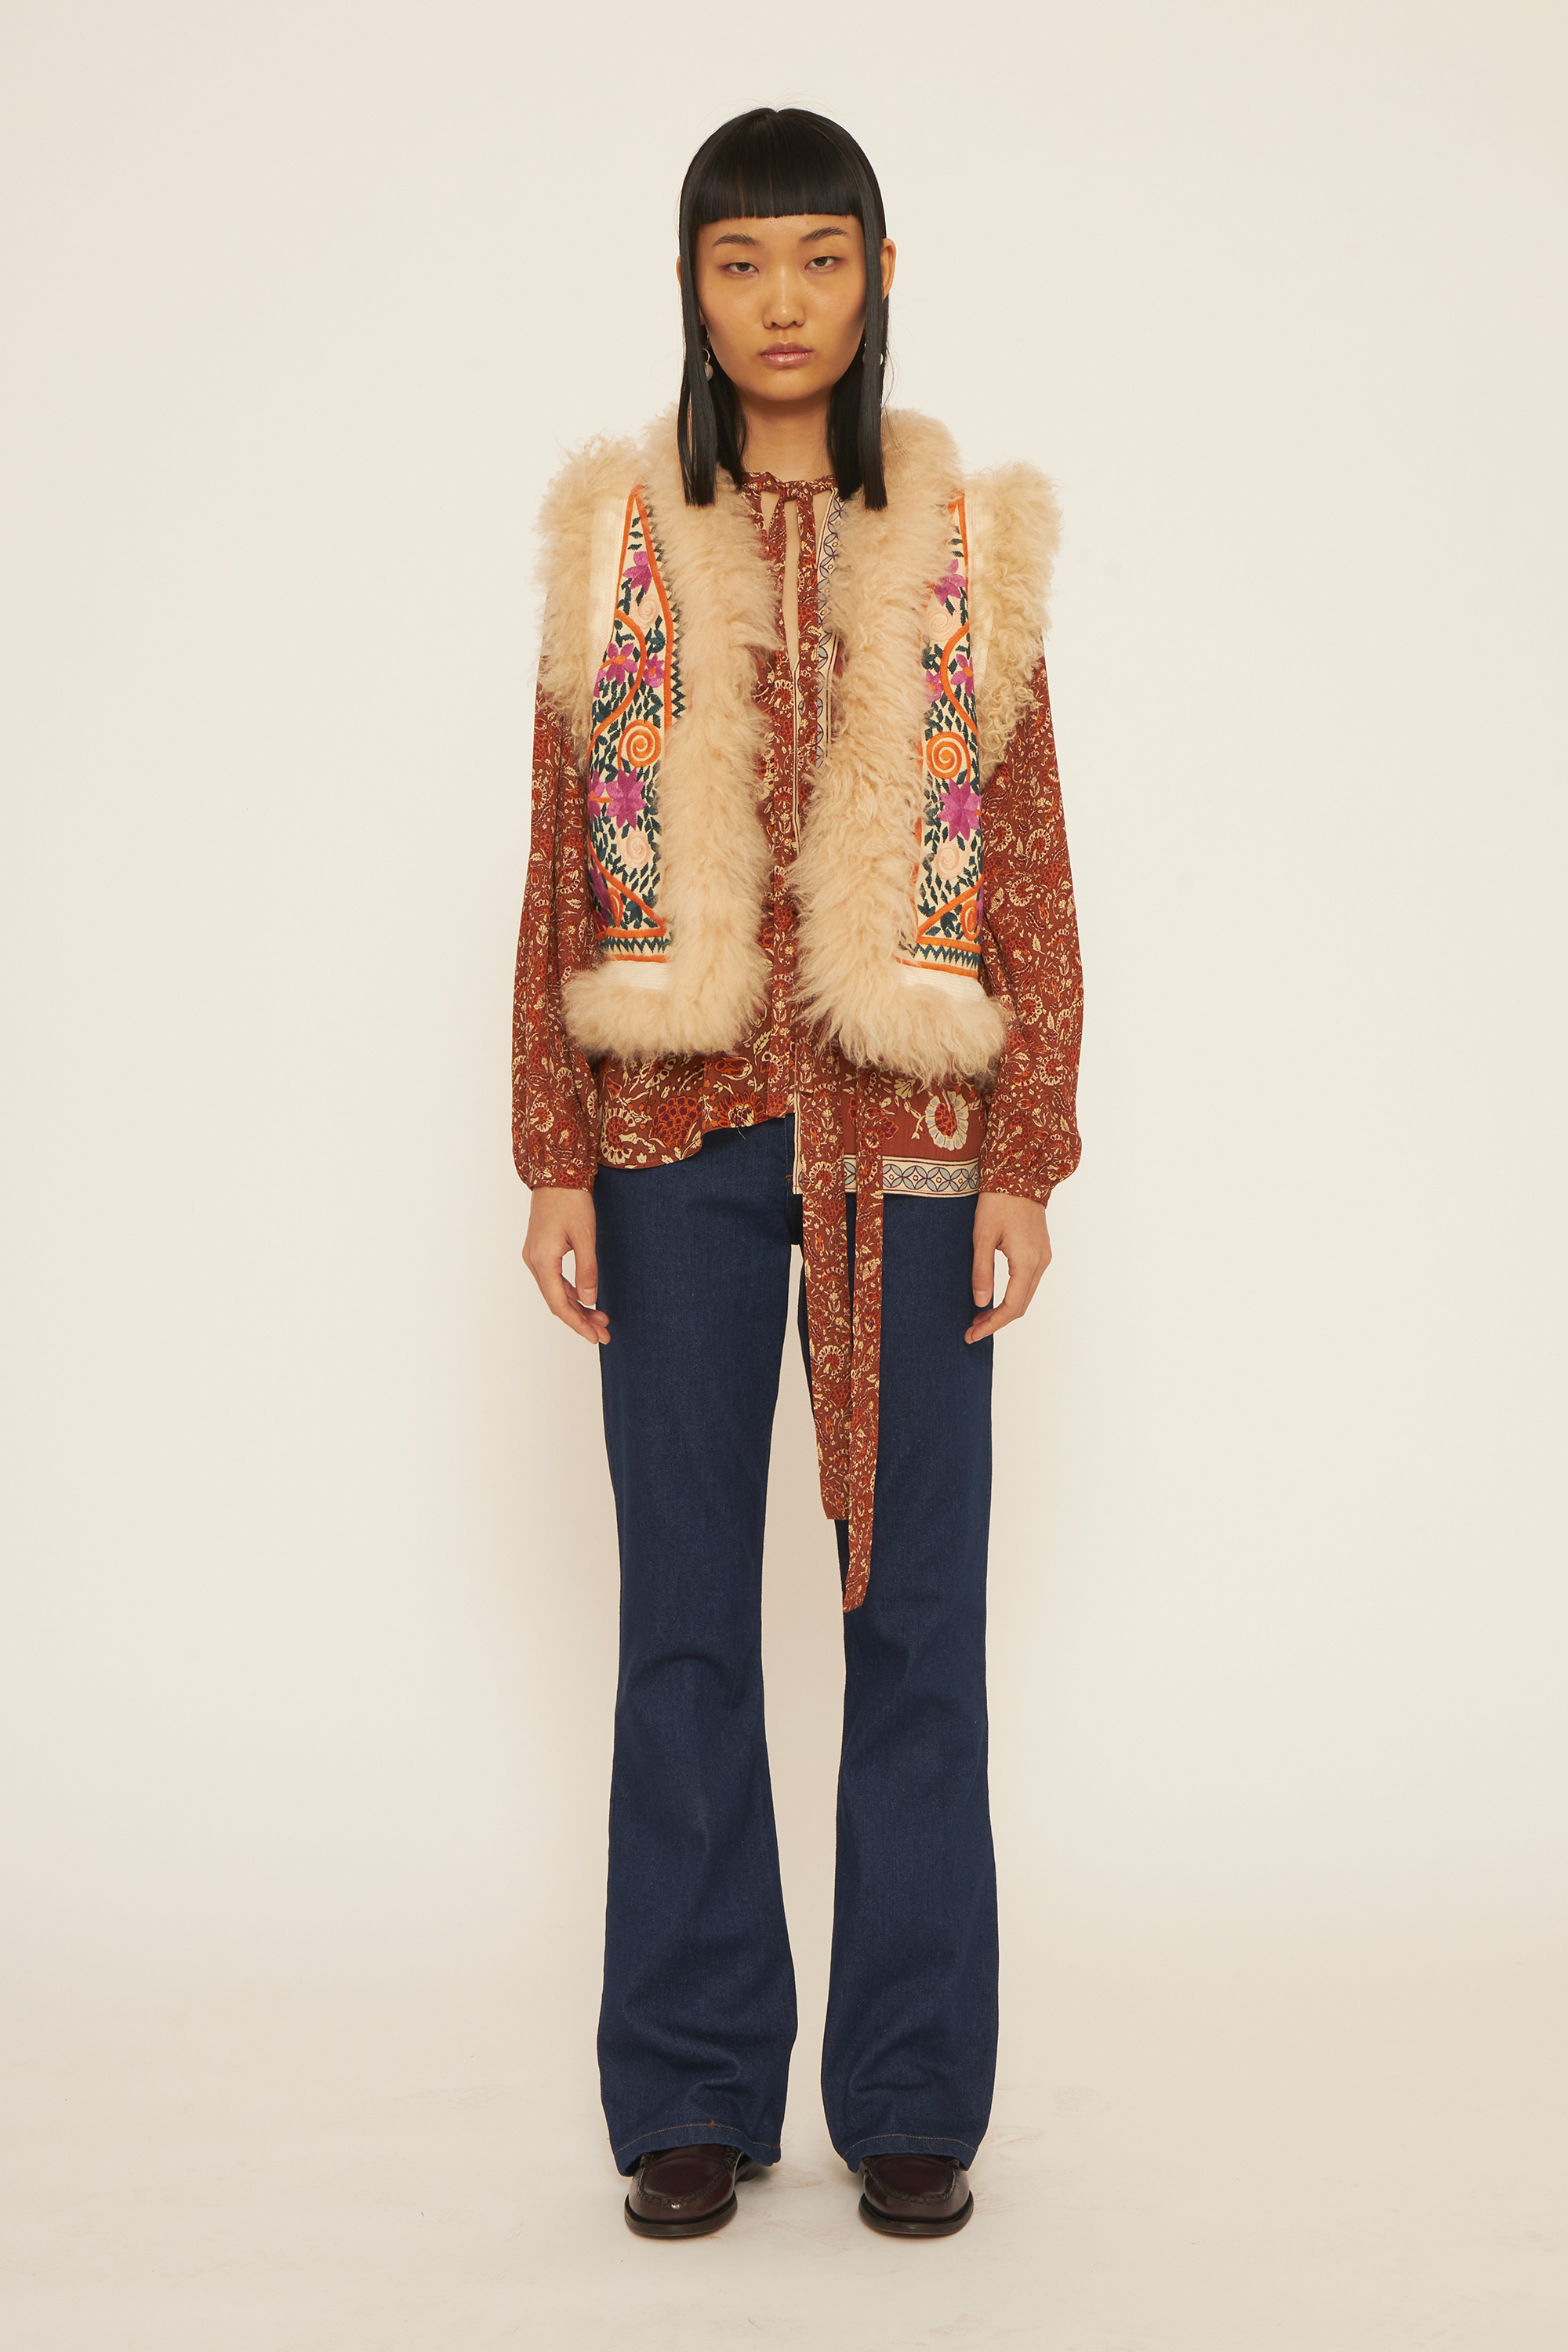 A girl wearing a rust blouse, a pair of jeans and a colorful embroidery gilet.